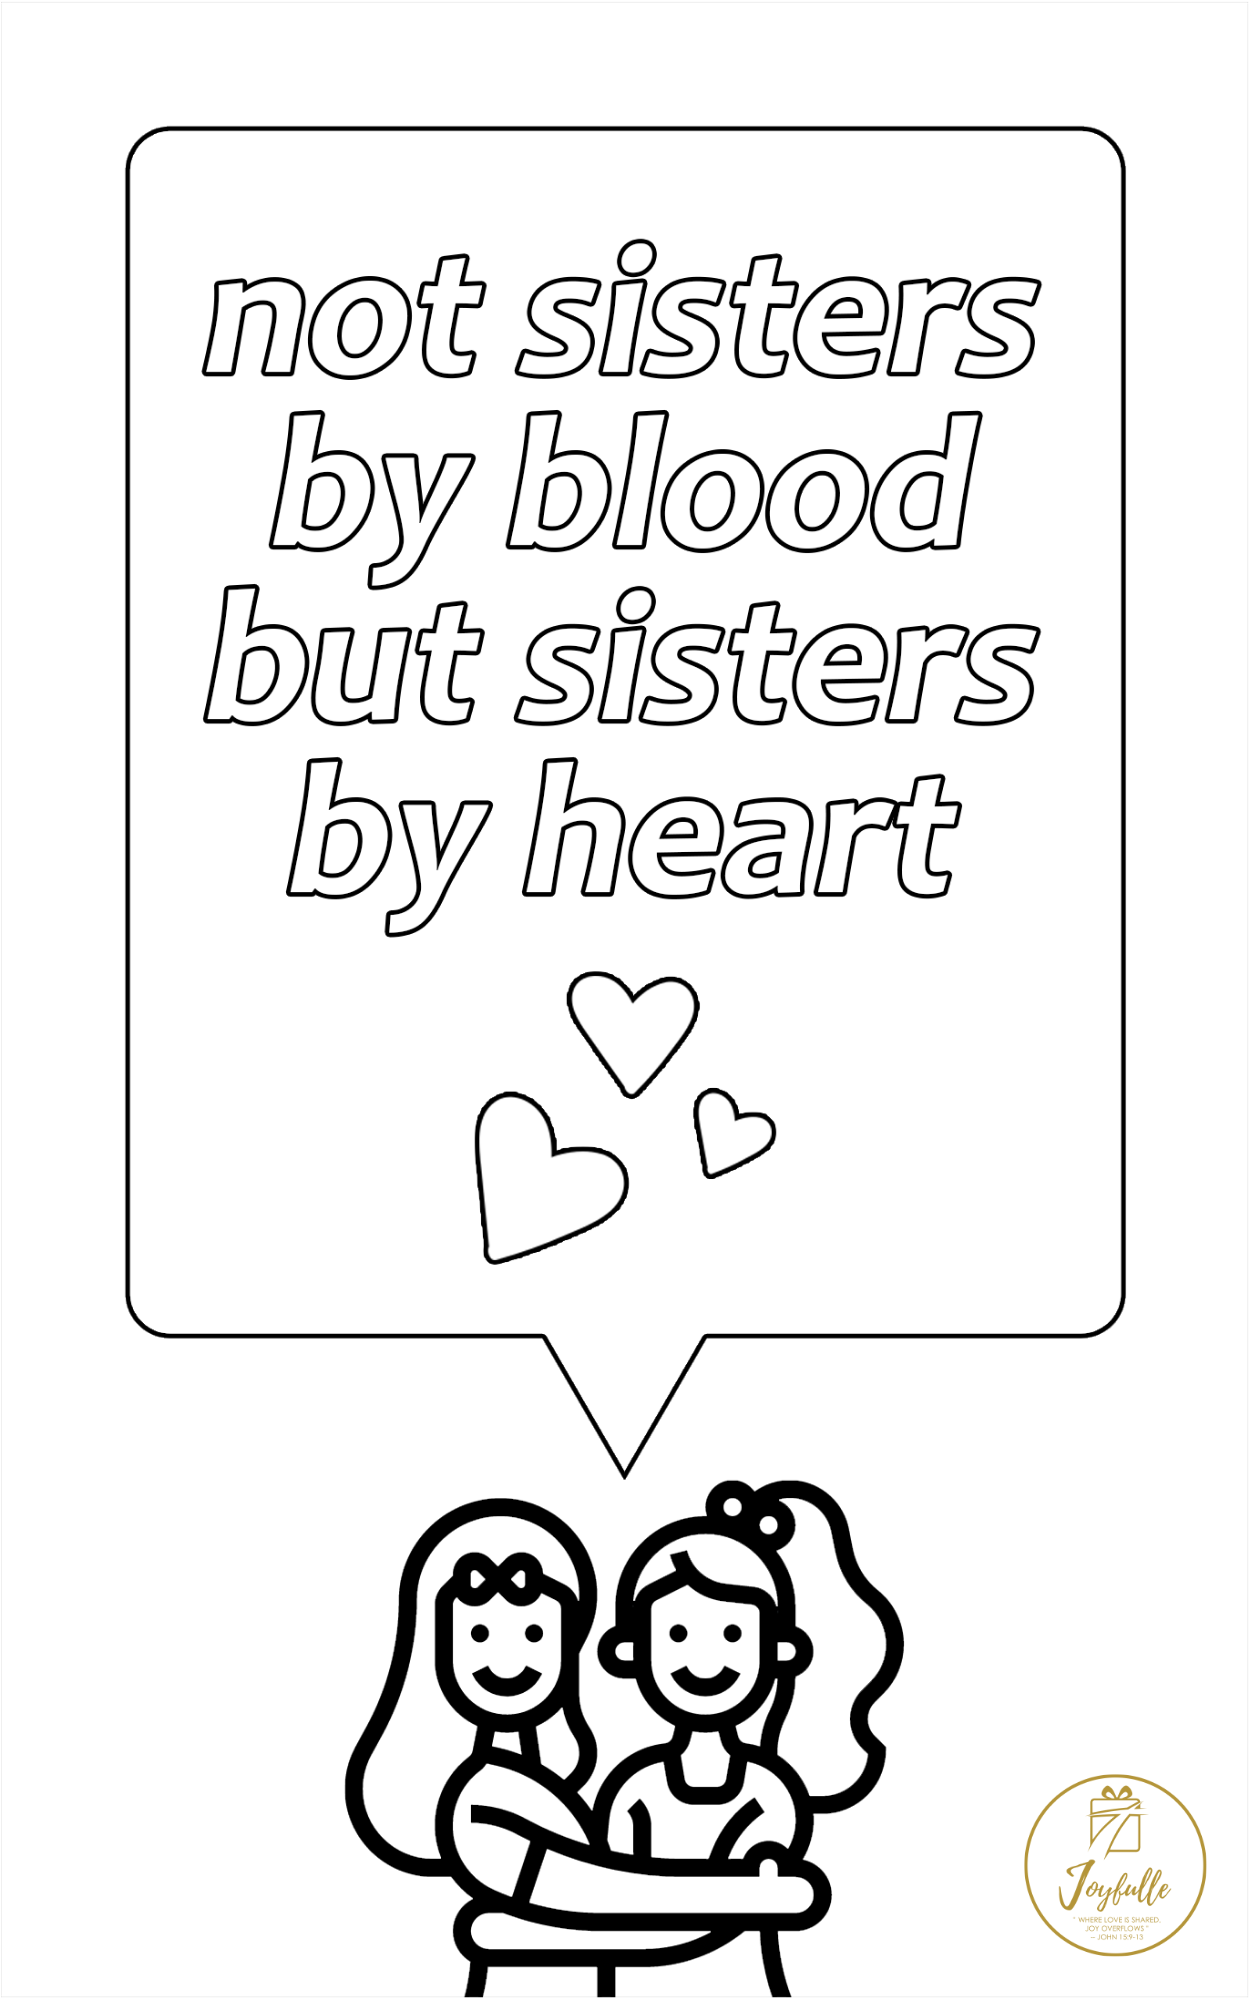 Sisters Day Greeting Card 02